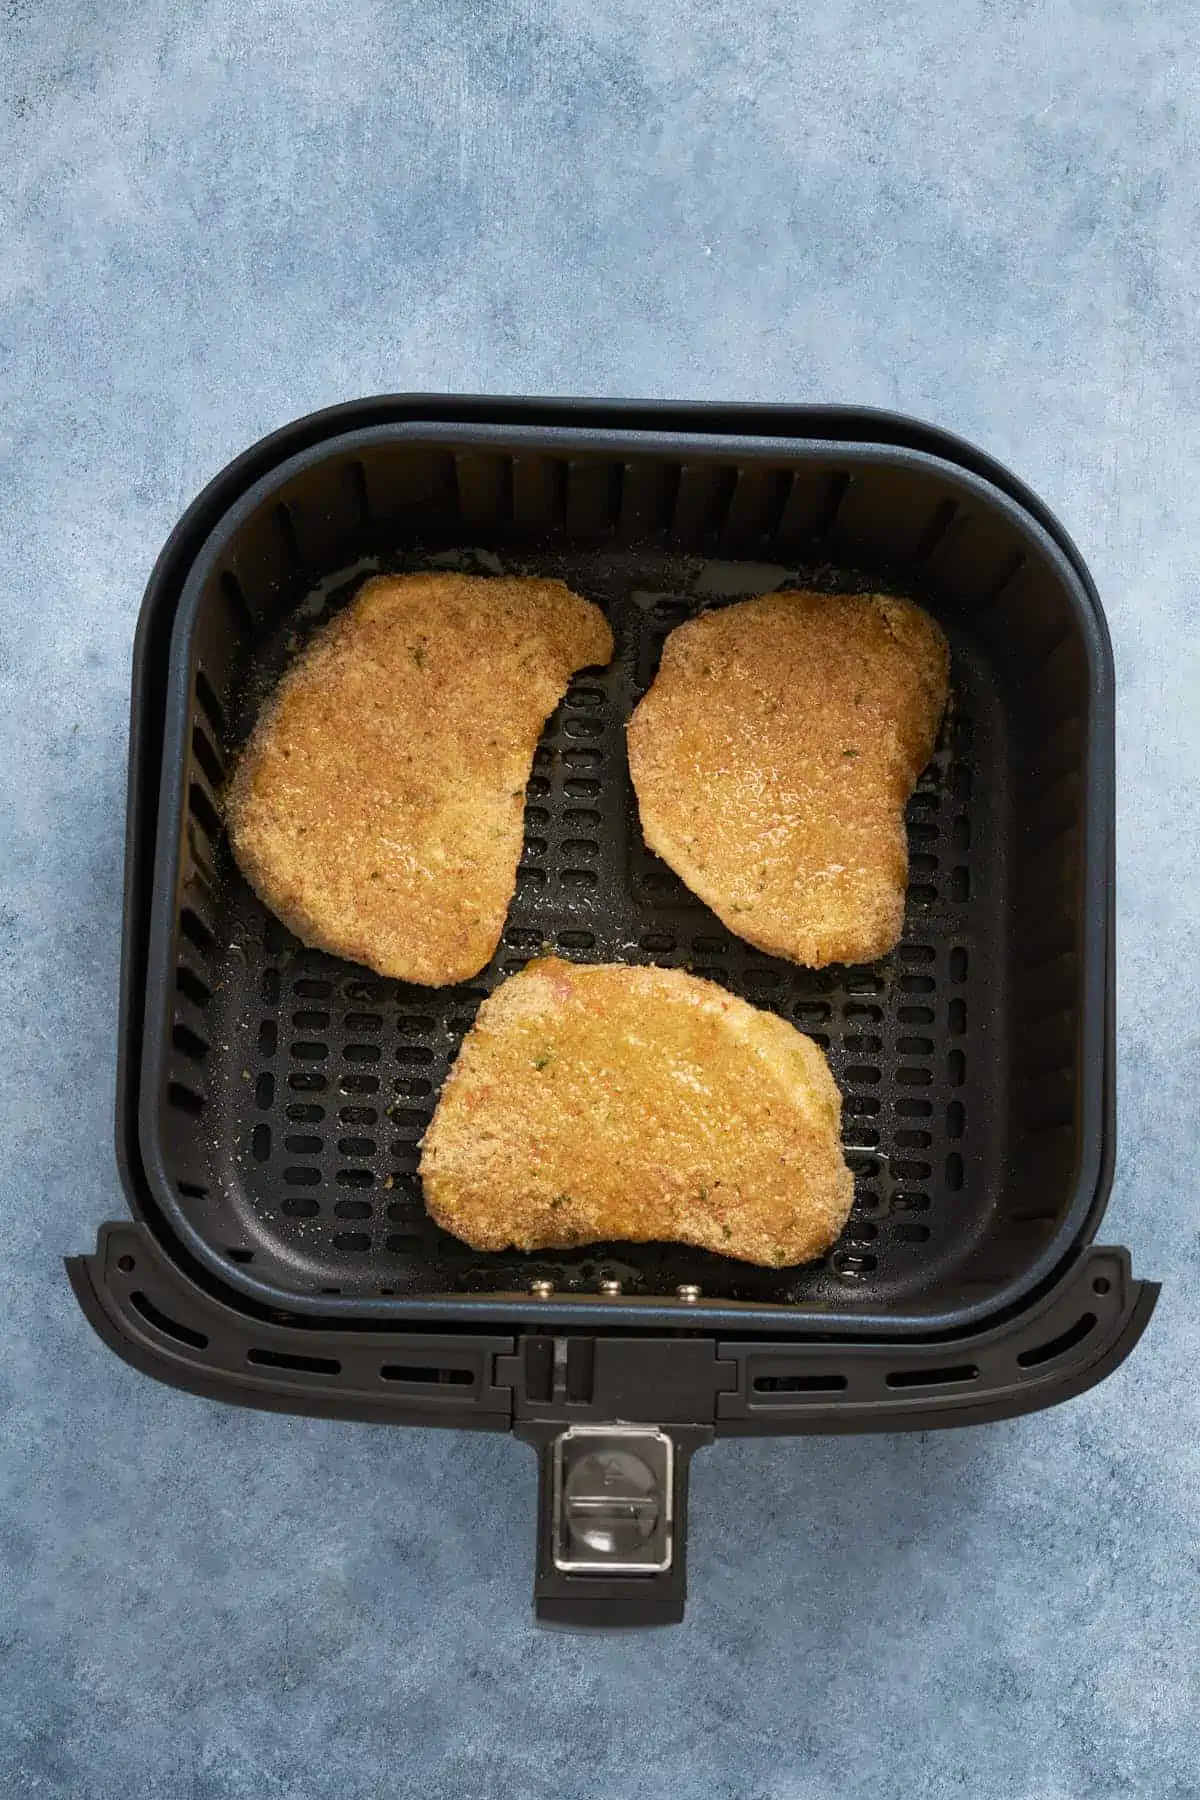 Breaded pork chops after spraying with olive oil in the air fryer basket.